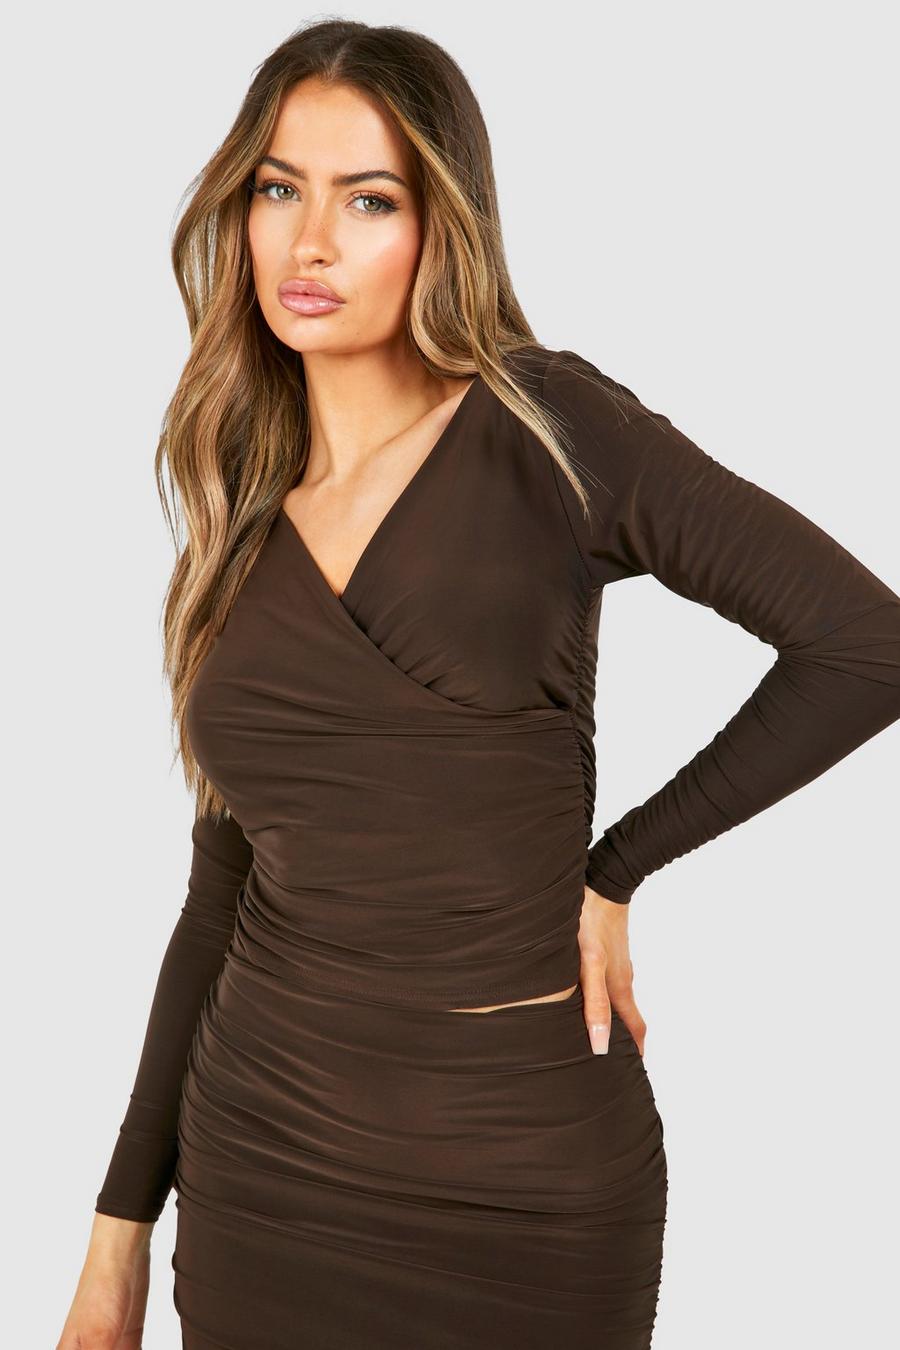 Chocolate V Neck Ruched Slinky Long Sleeve Top